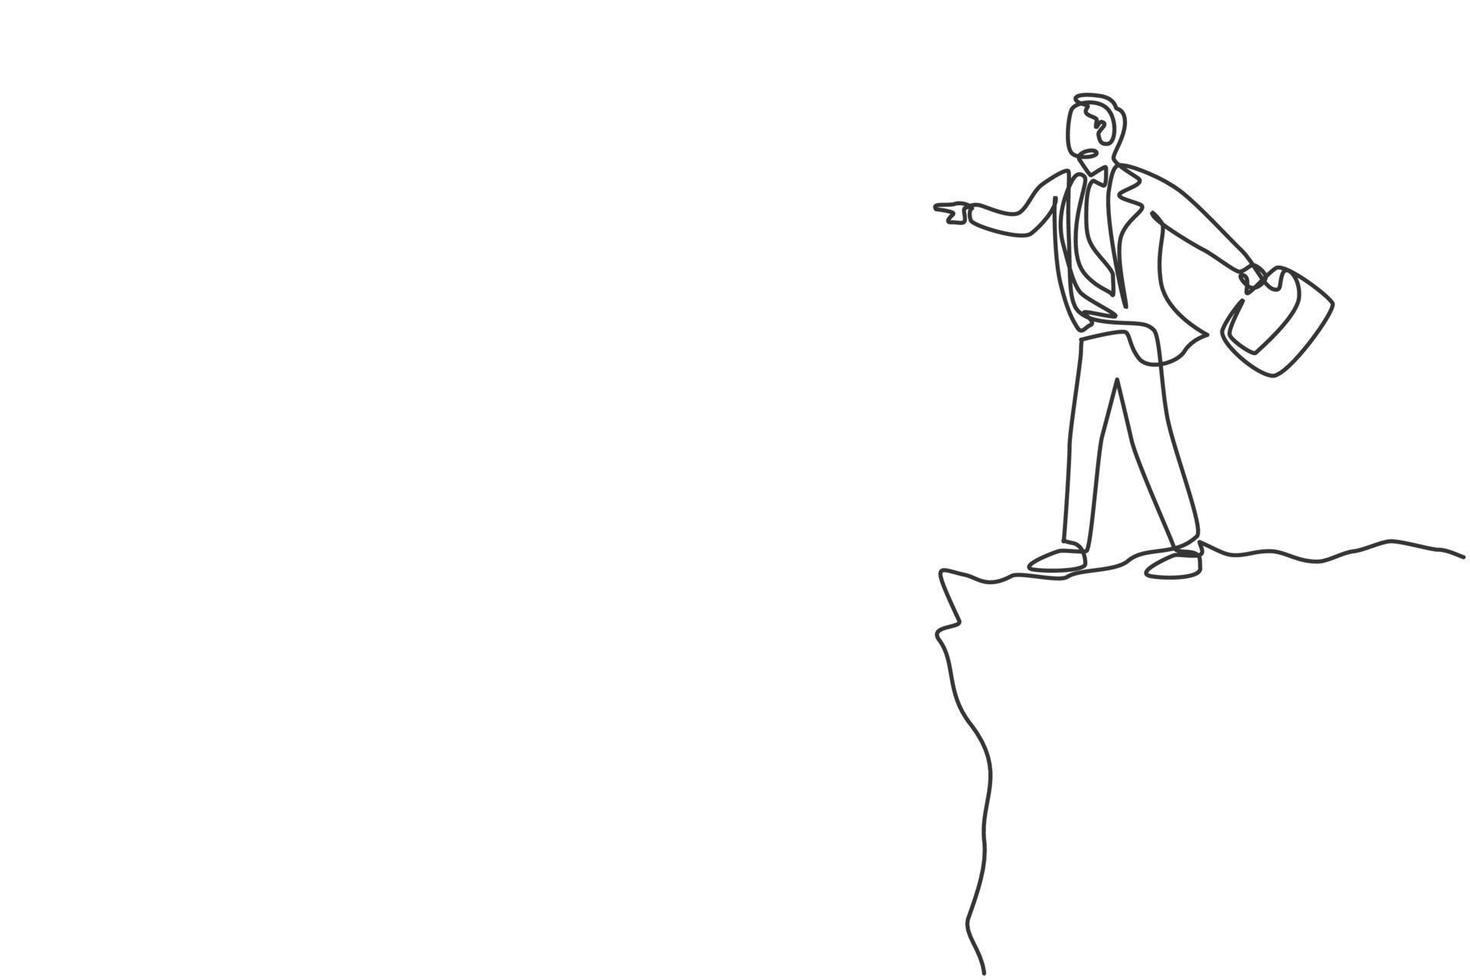 Single one line drawing of young smart business man standing on the edge of the cliff. Business challenge and freedom concept. Modern continuous line draw. Minimal design graphic vector illustration